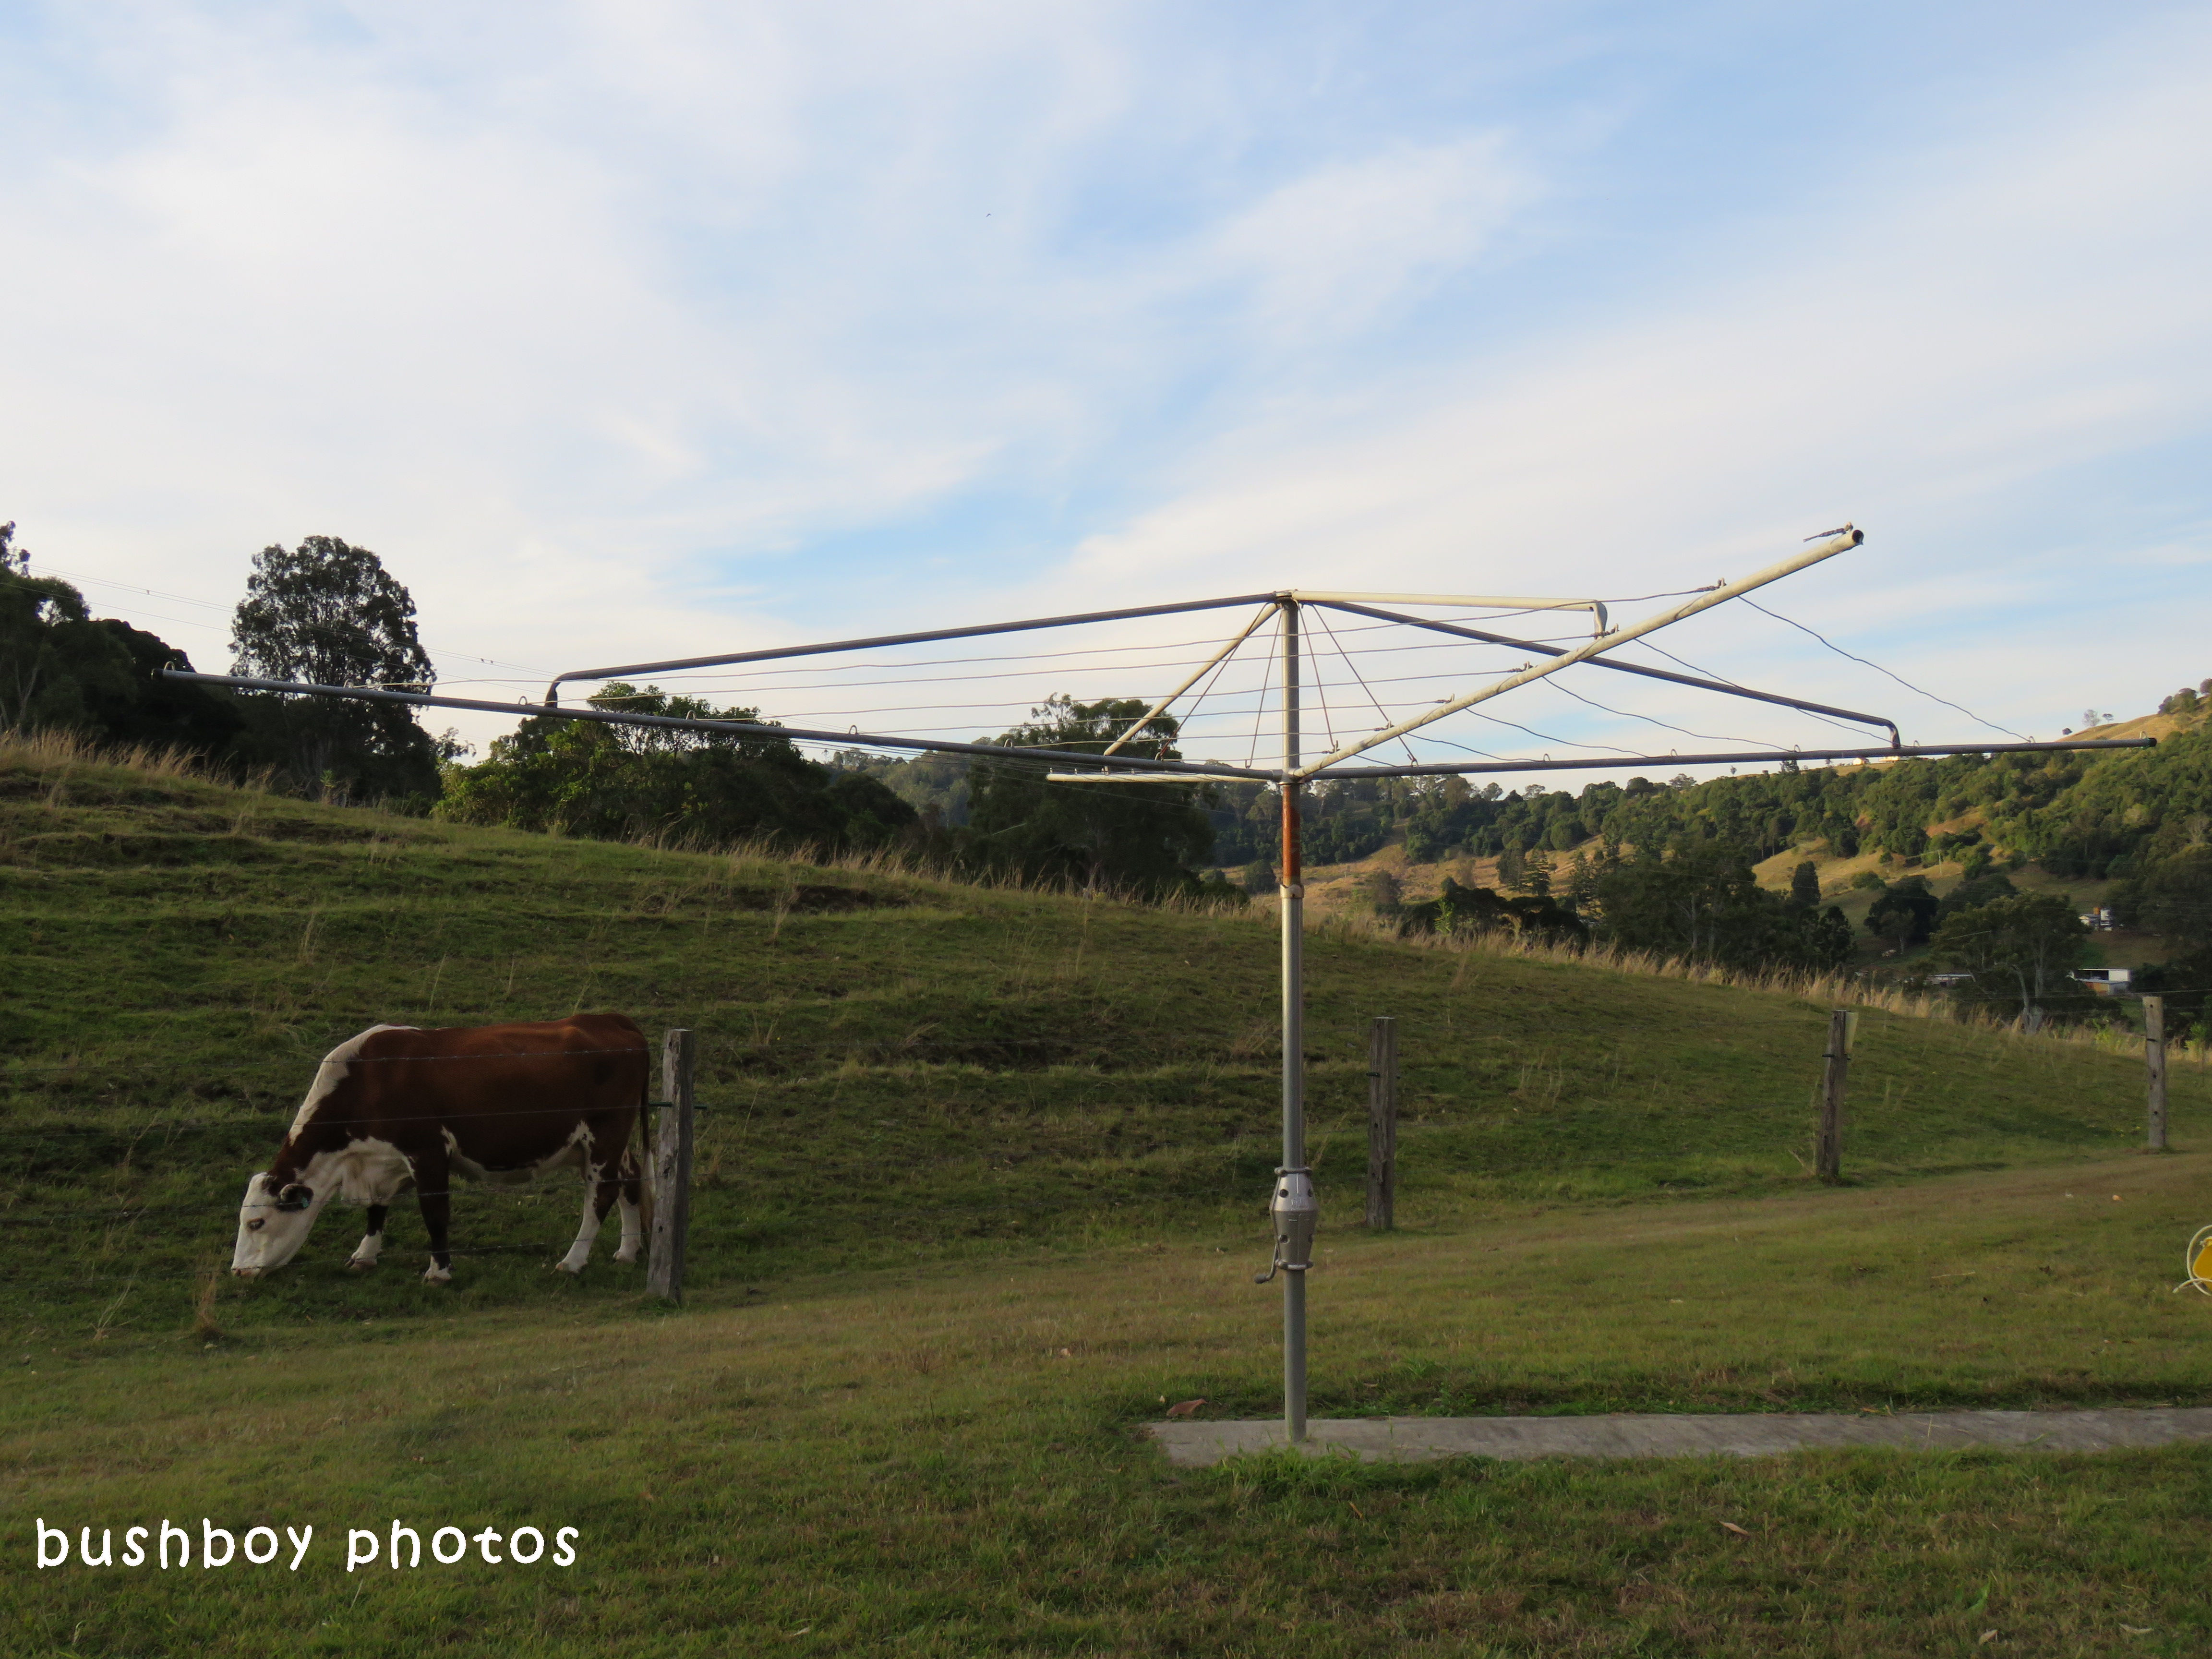 cow_clothes line_named_caniaba_june 2018